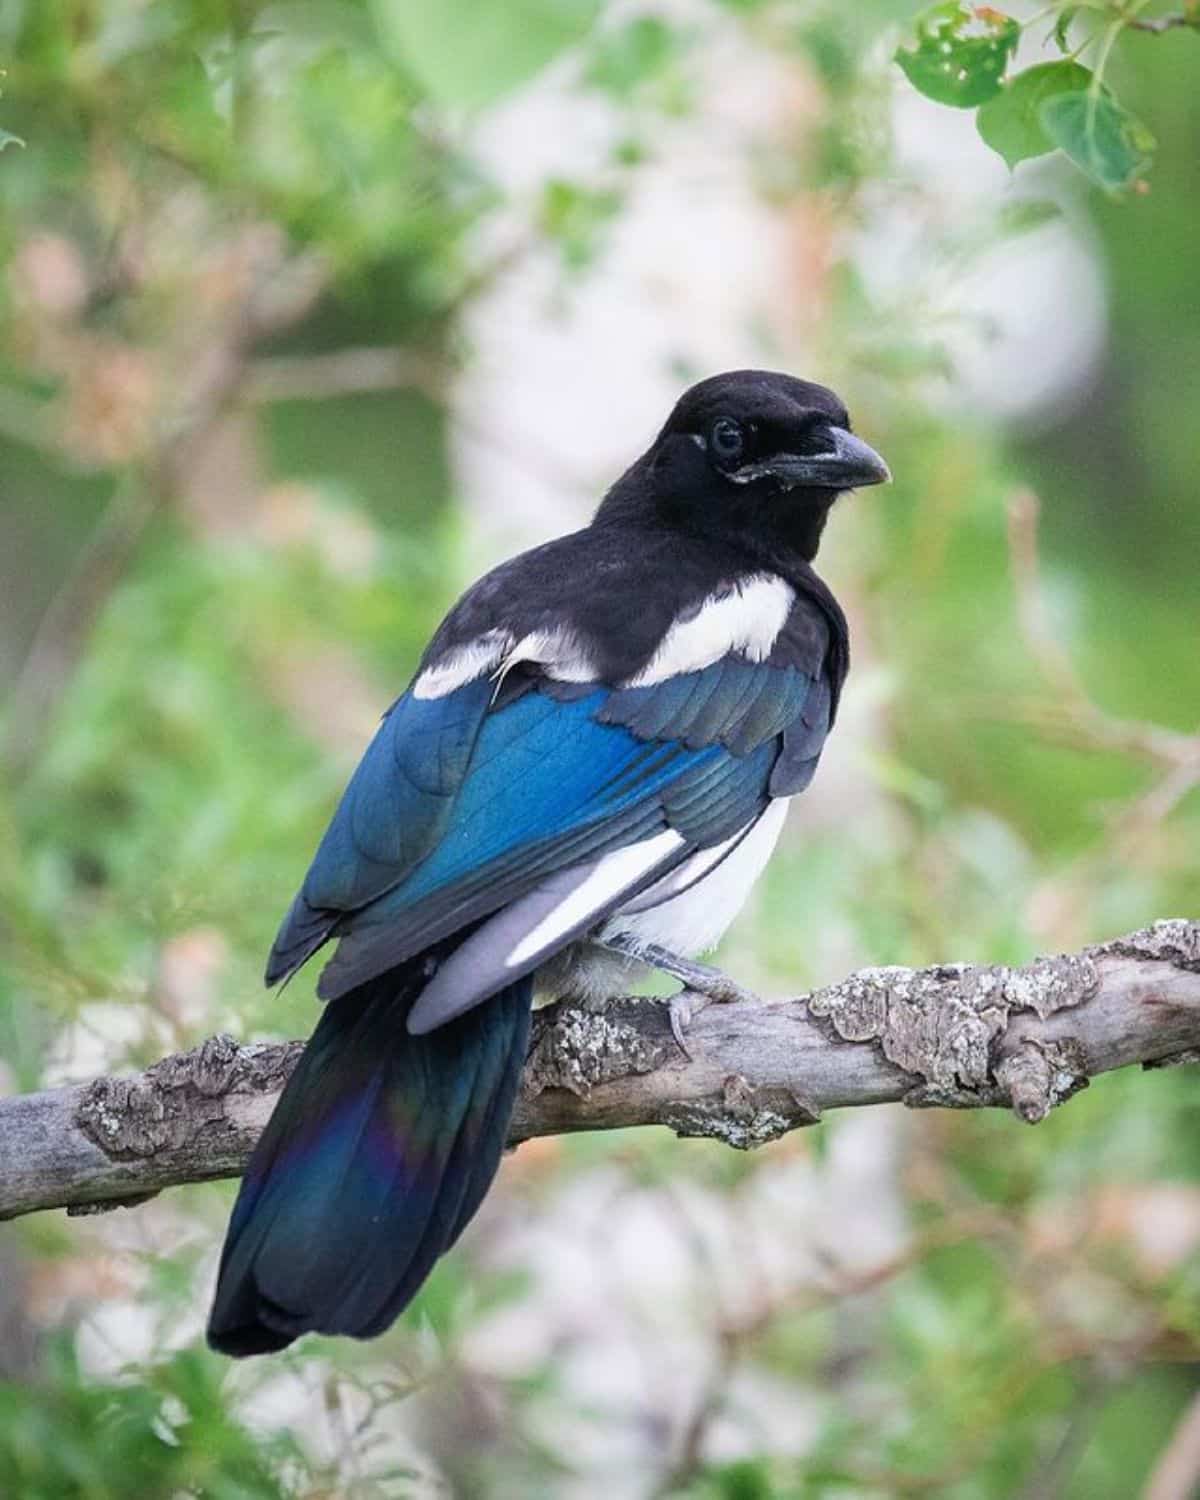 A beautiful Black-billed Magpie perched on a dried branch.